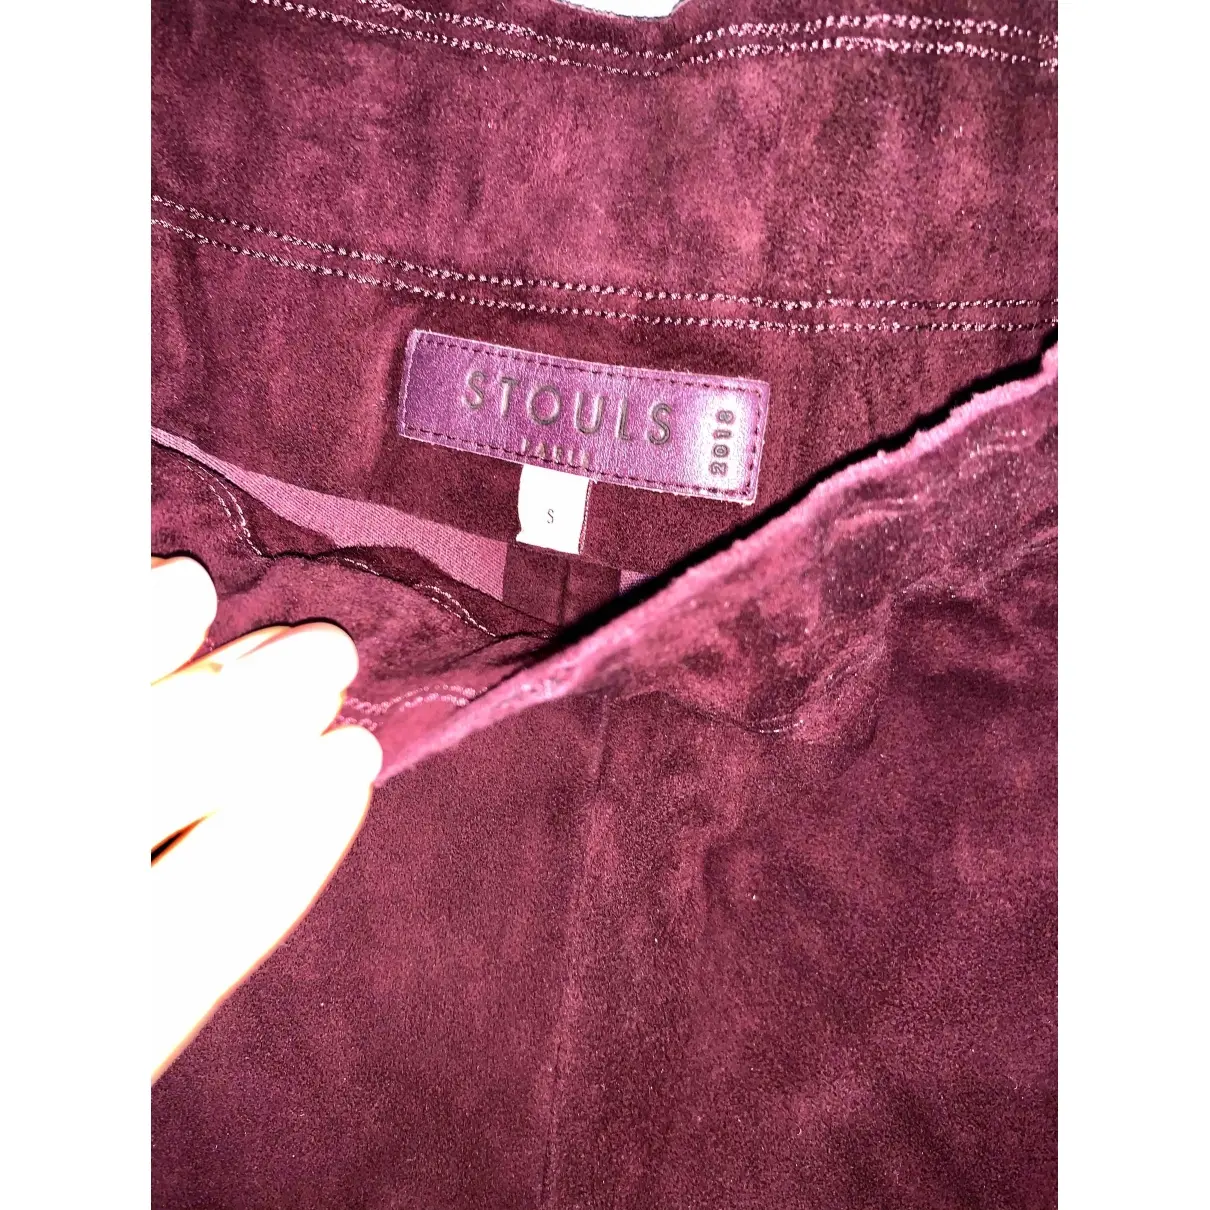 Buy Stouls Burgundy Suede Trousers online